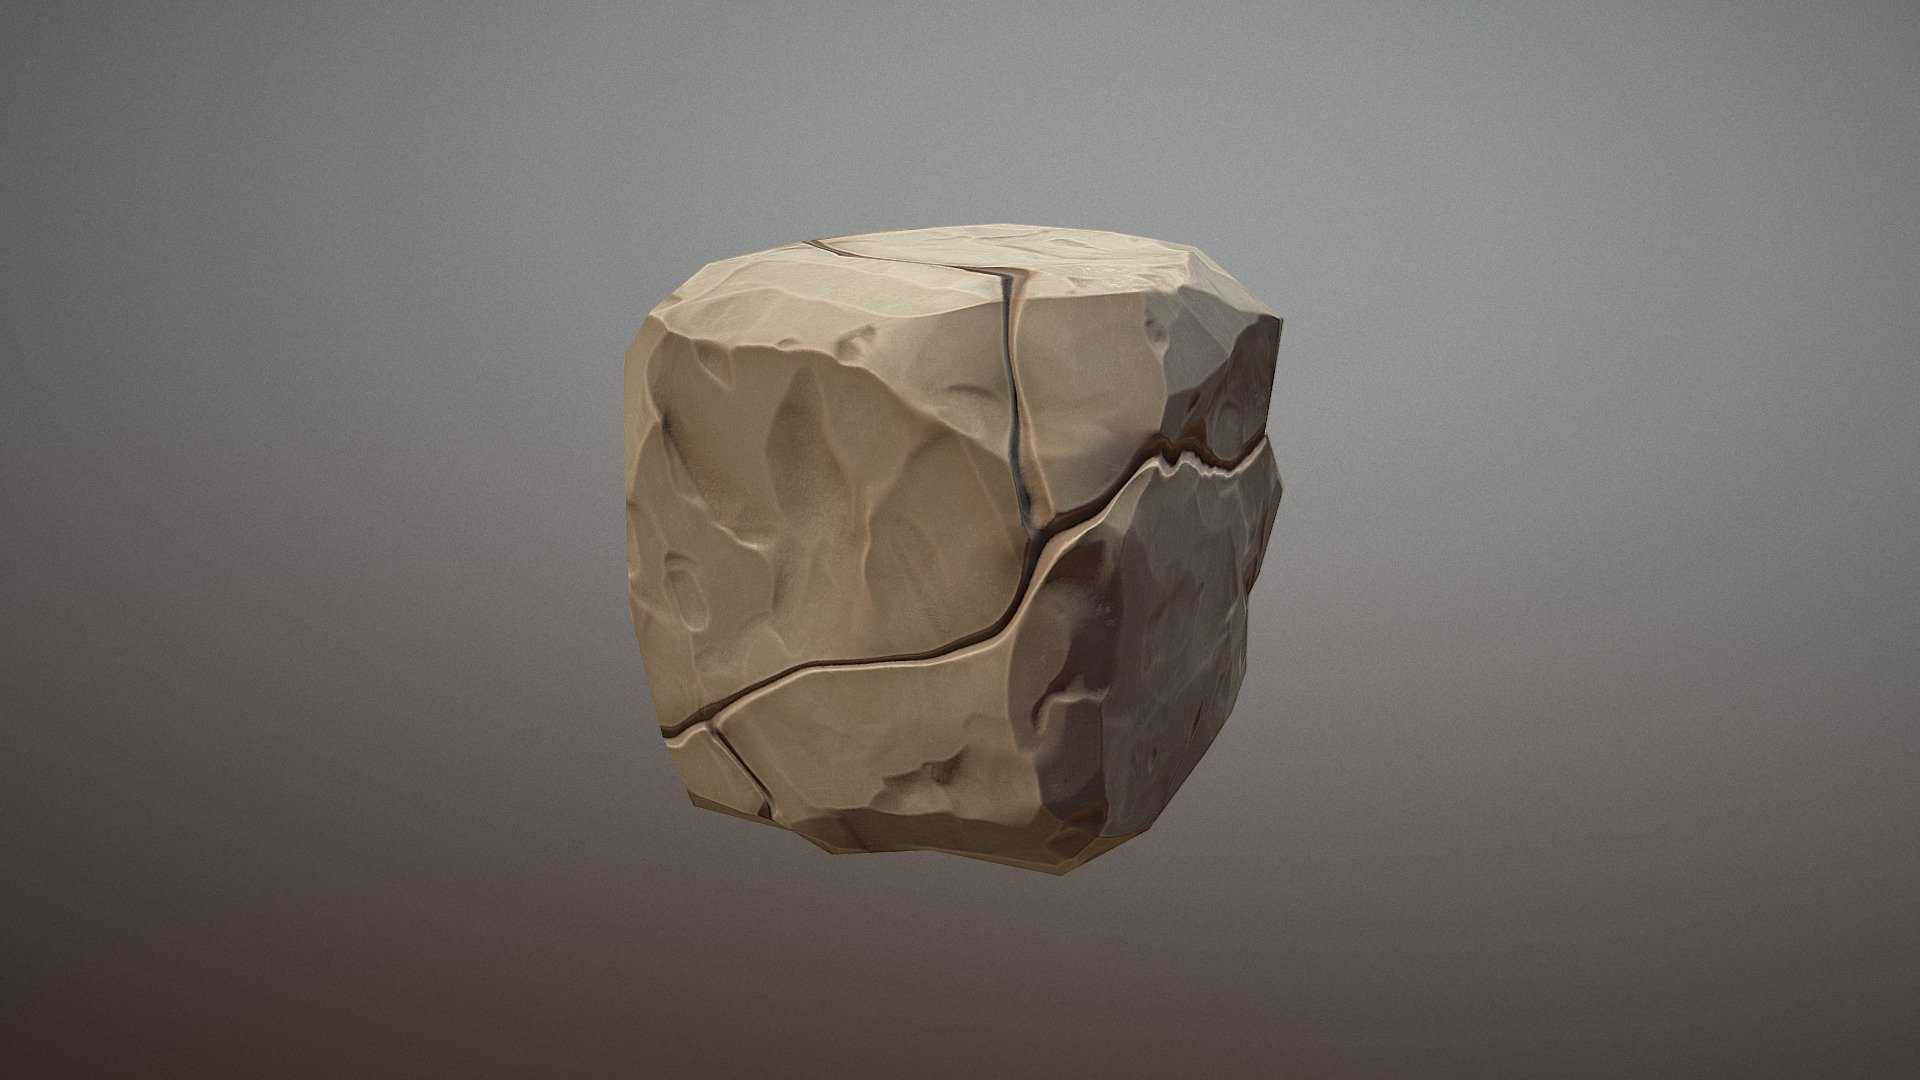 I've exported it while being literally drink. FeelsSplendidMan - A Rock 3d model